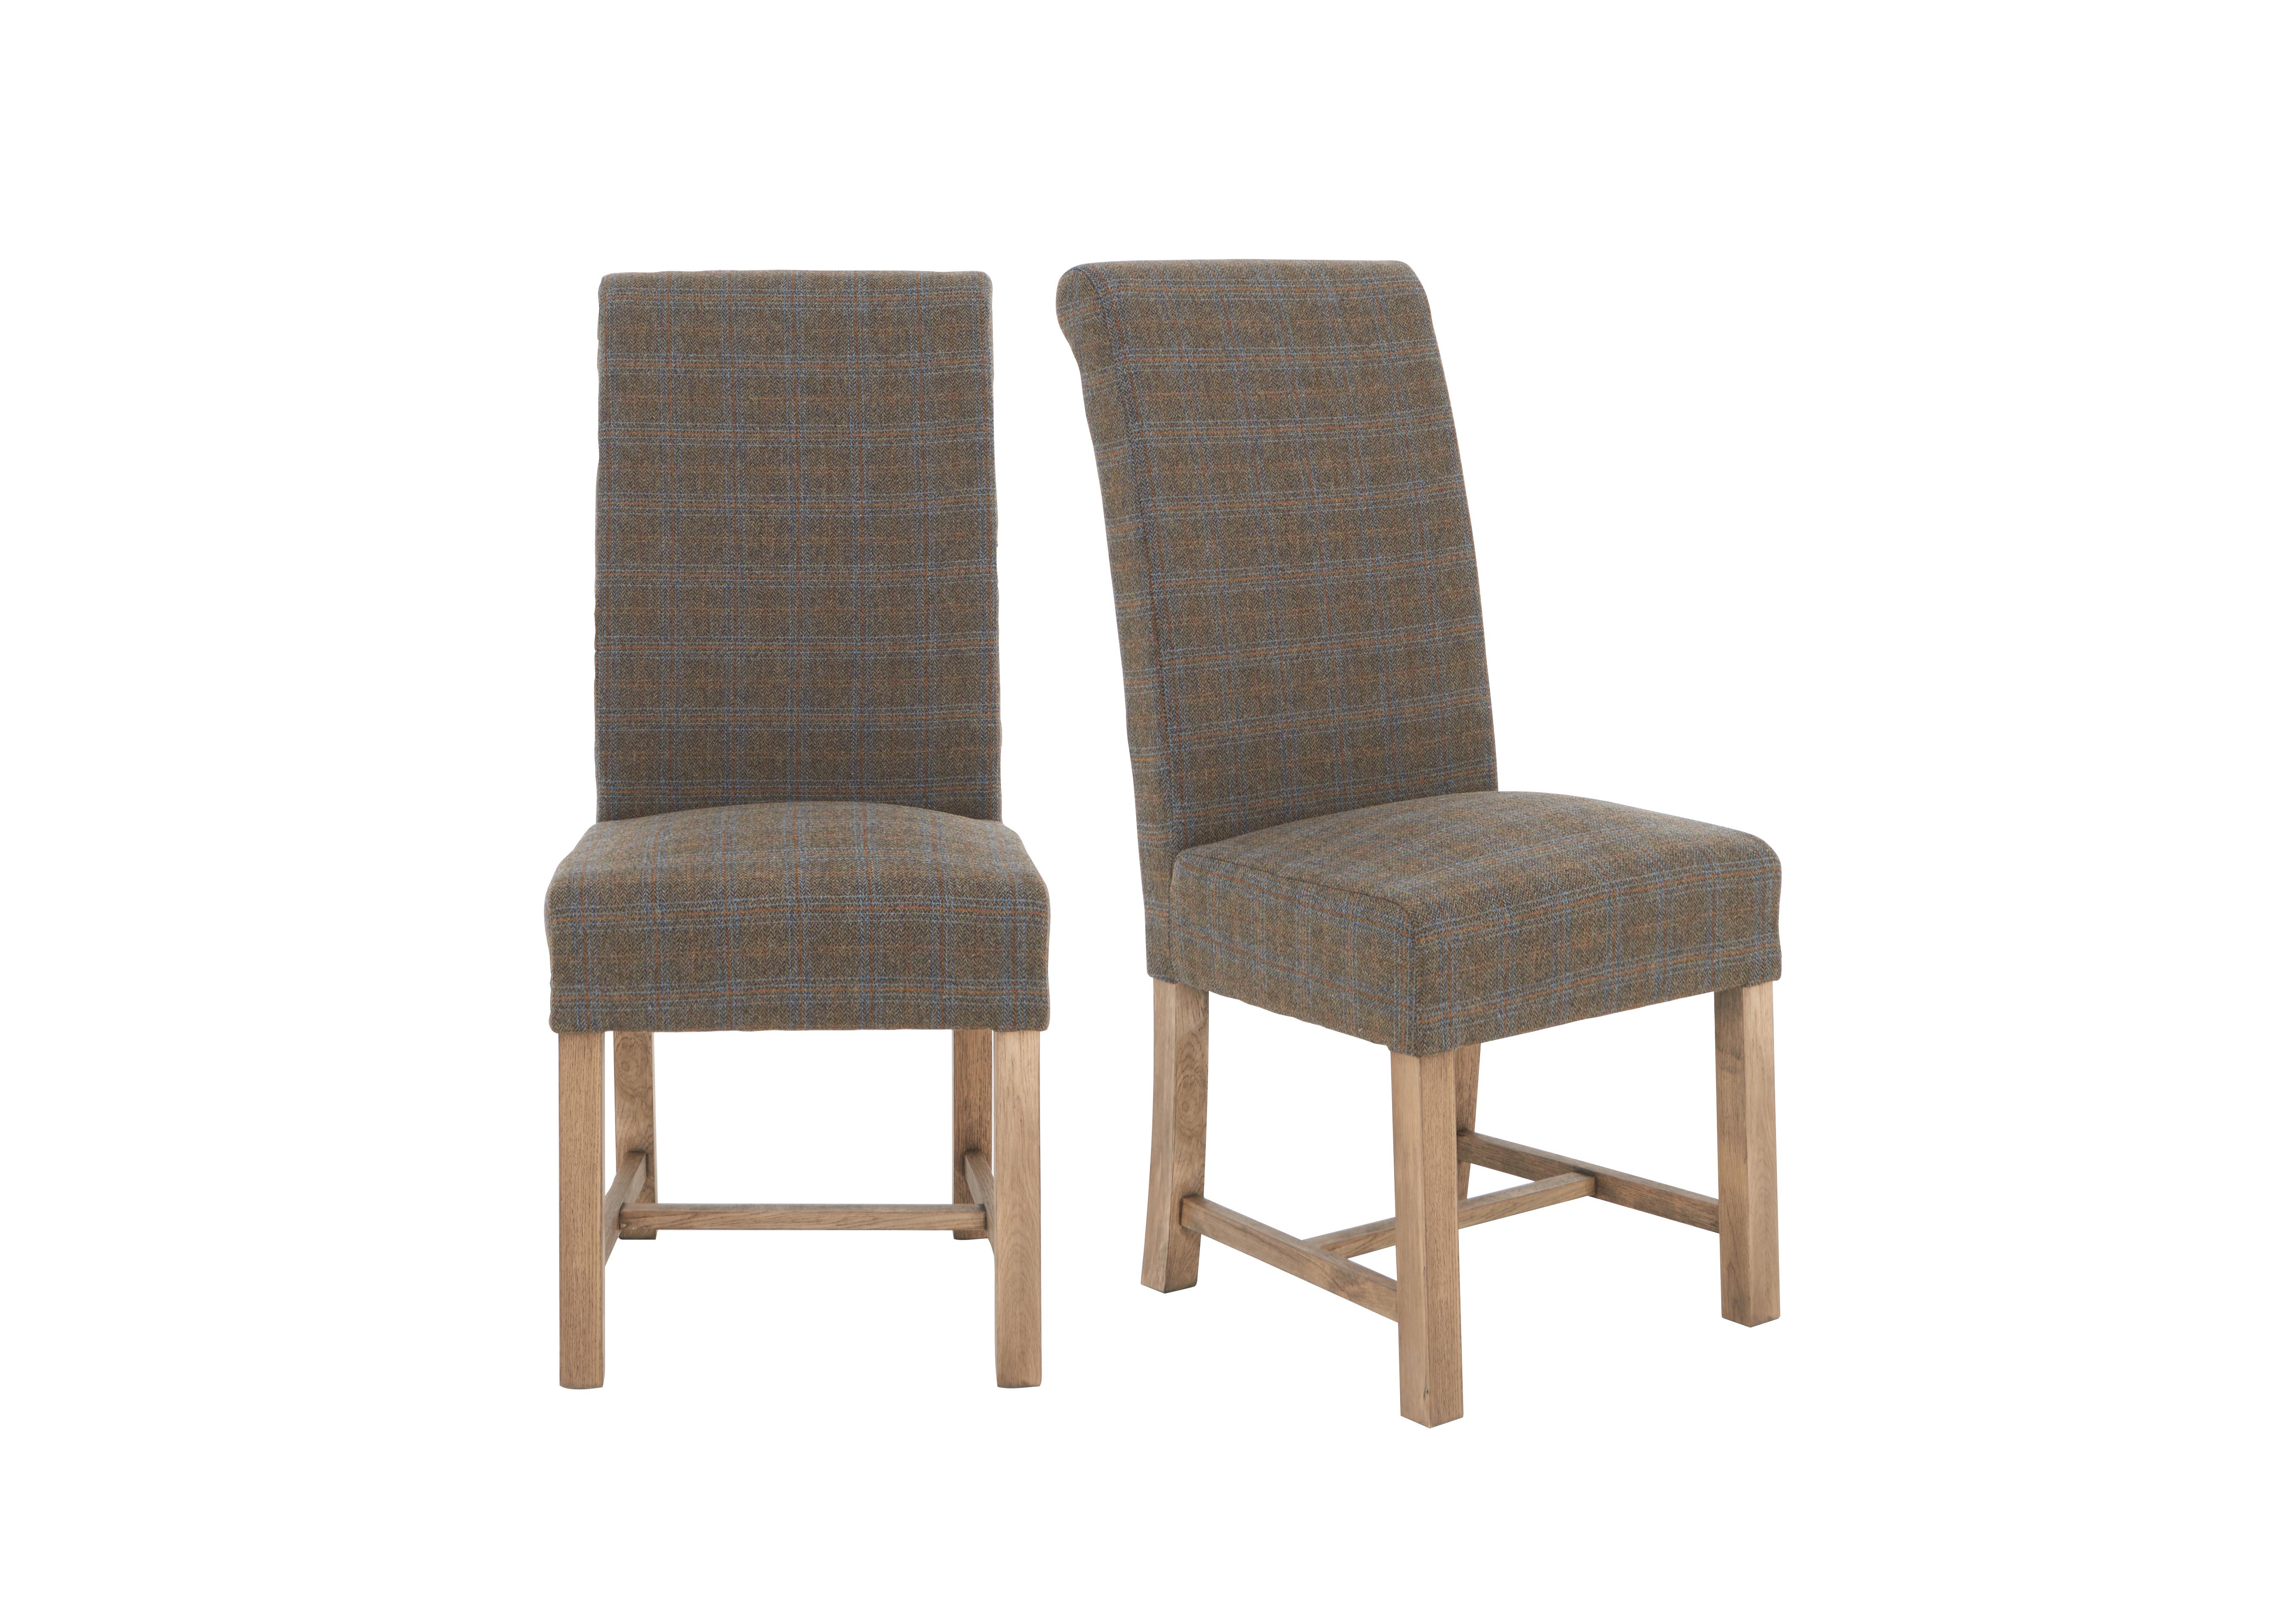 Hewitt Pair of Upholstered Dining Chair in New York Midnight on Furniture Village